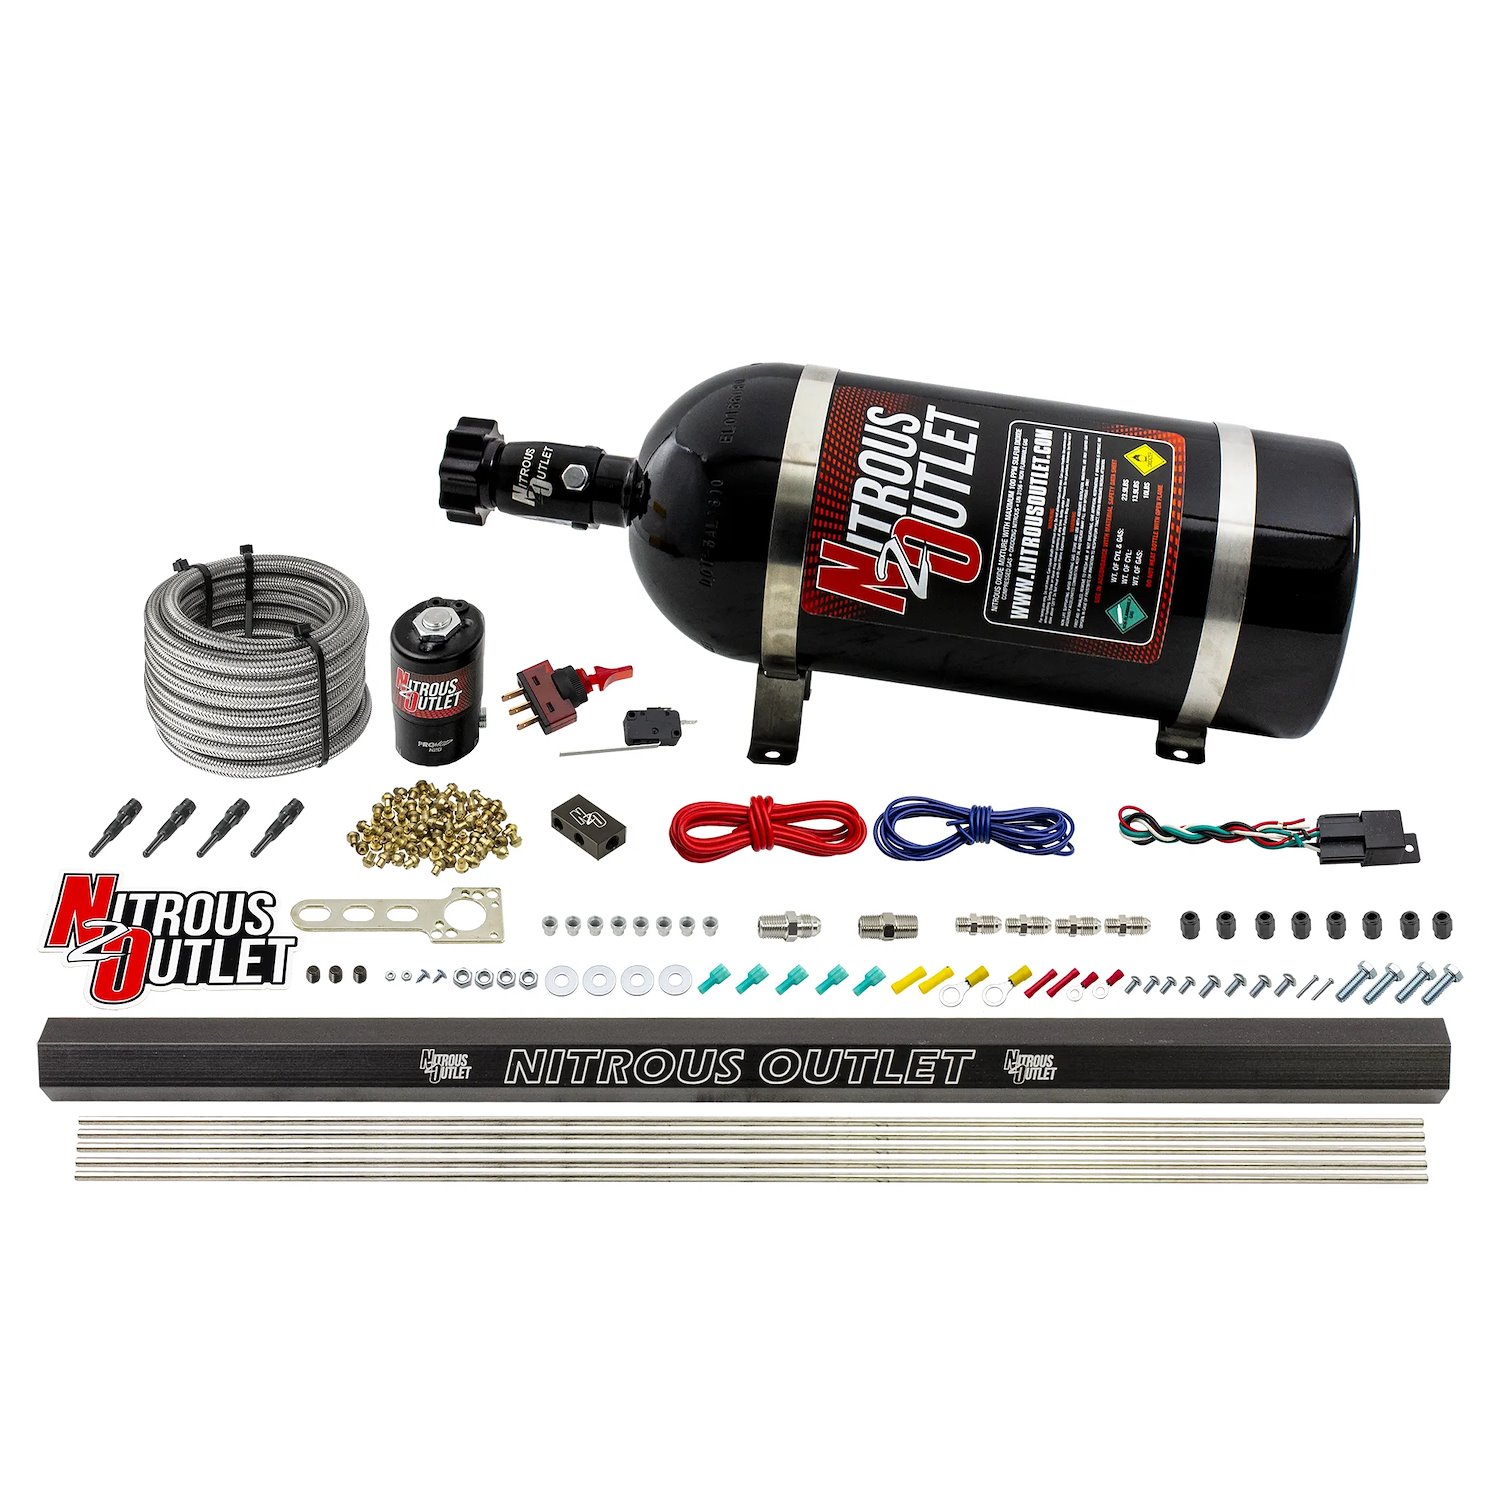 00-10361-10 Dry 4-Cyl Direct Port System, .122 Nitrous Solenoid/Injection Rail/90-Degree Discharge Nozzles, 50-250HP, 10lb